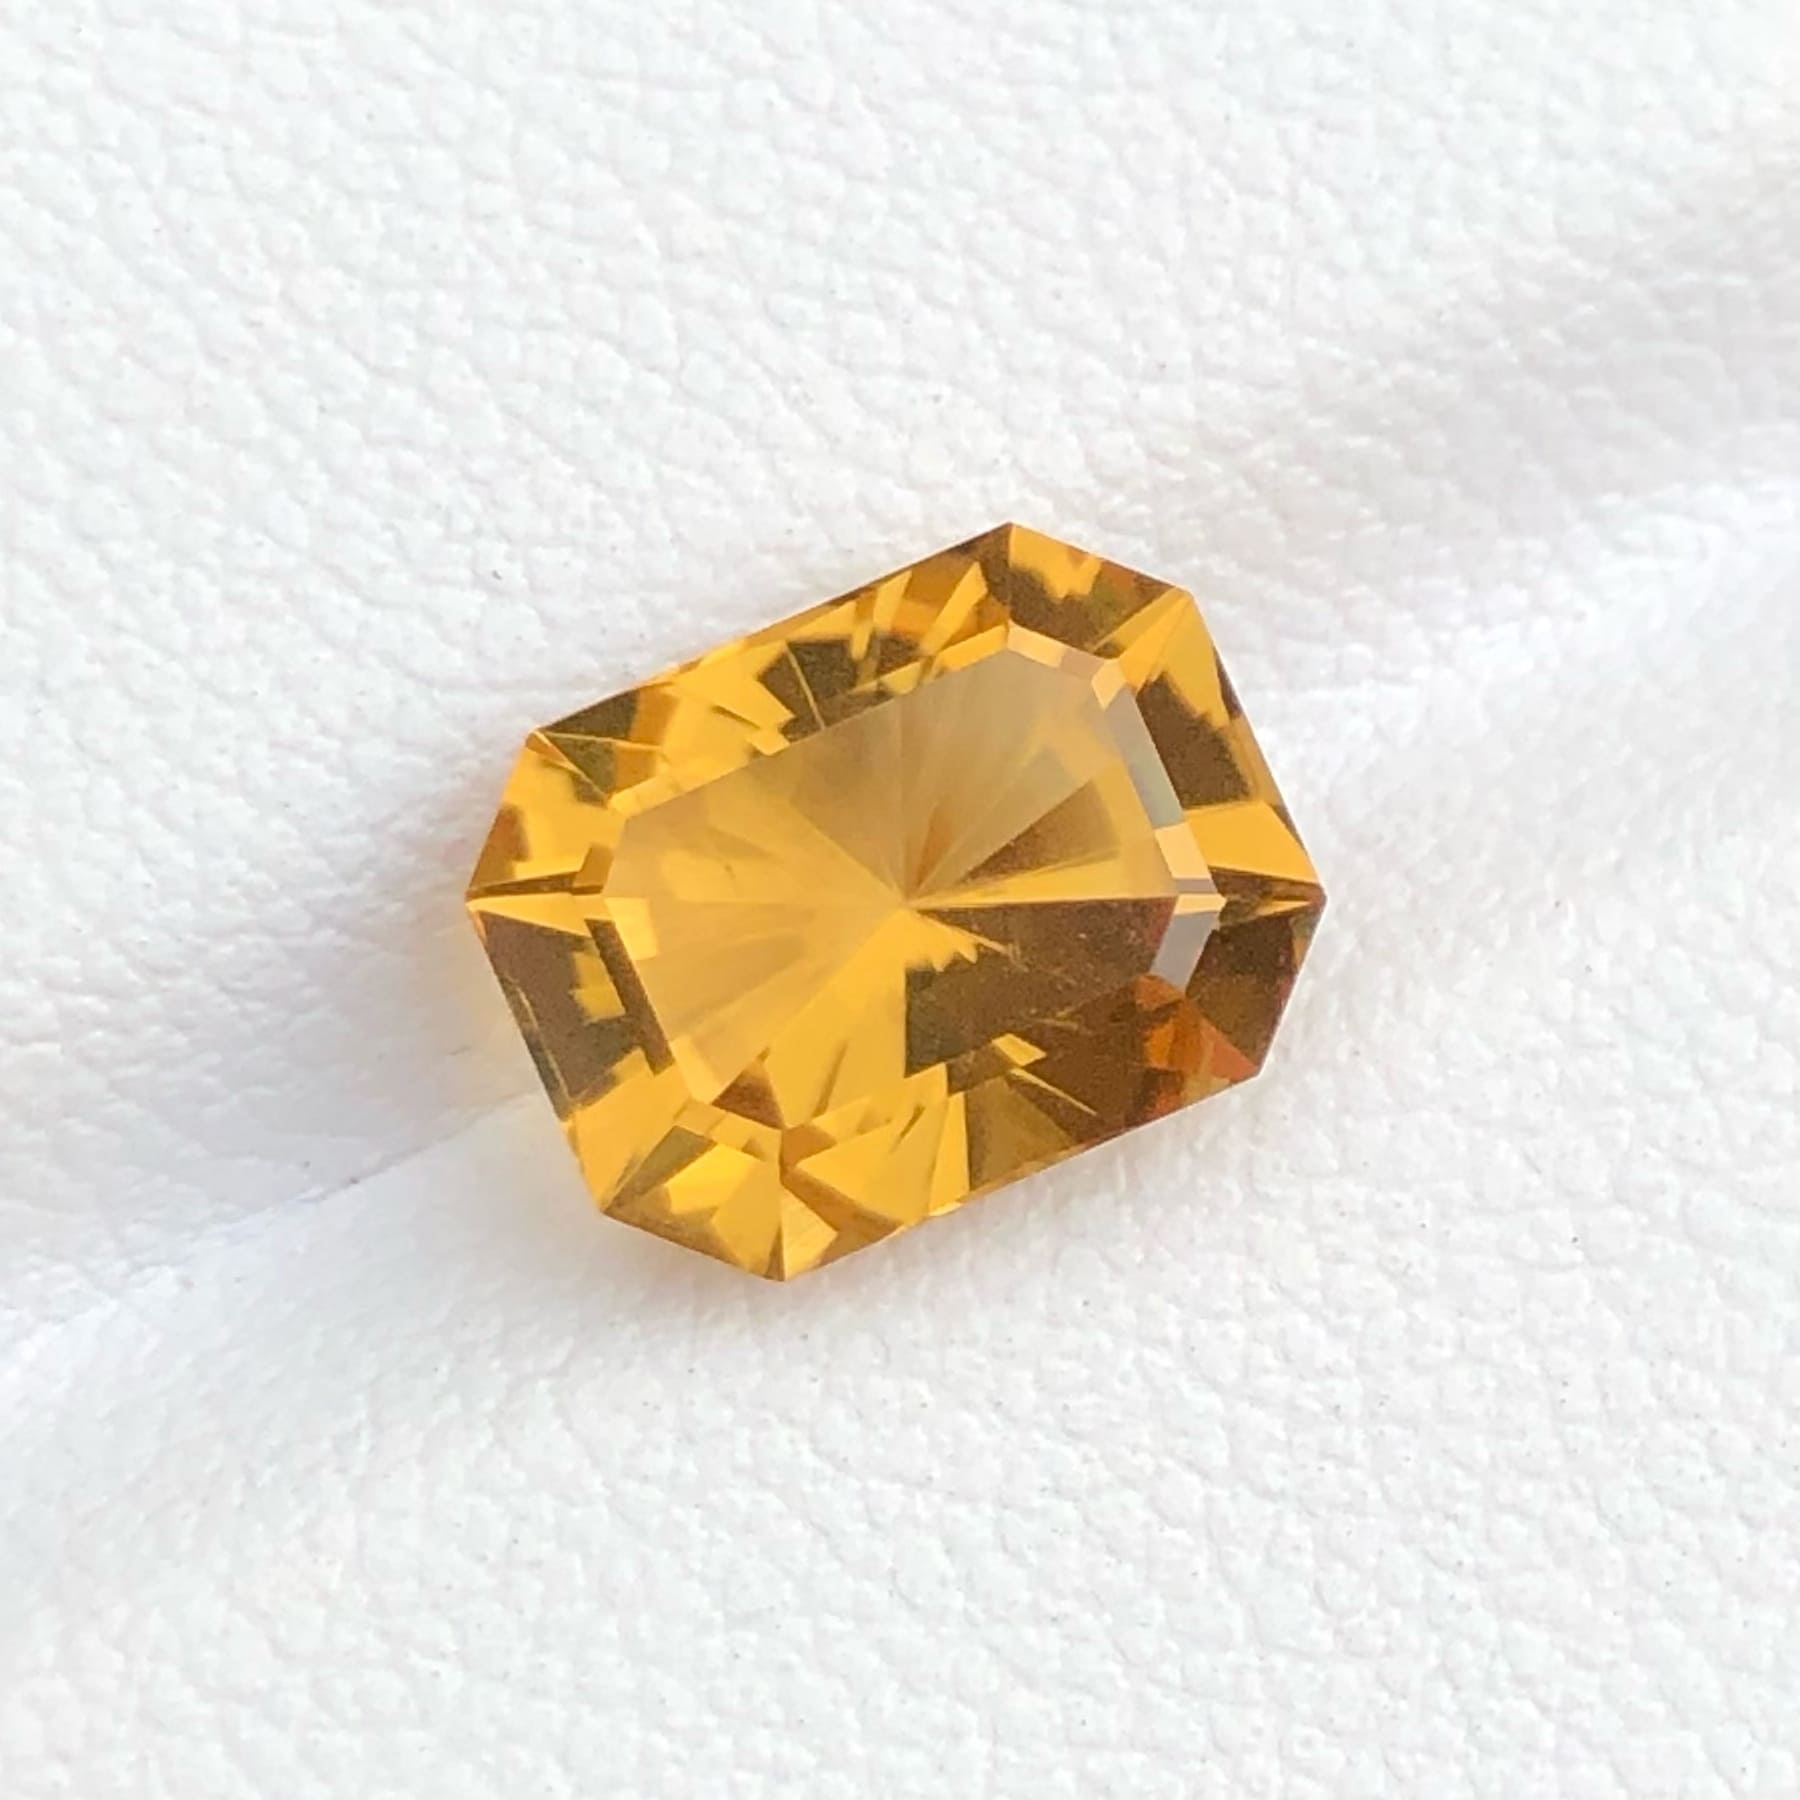 Buy 3.04 carats Faceted Yellowish Orange Citrine